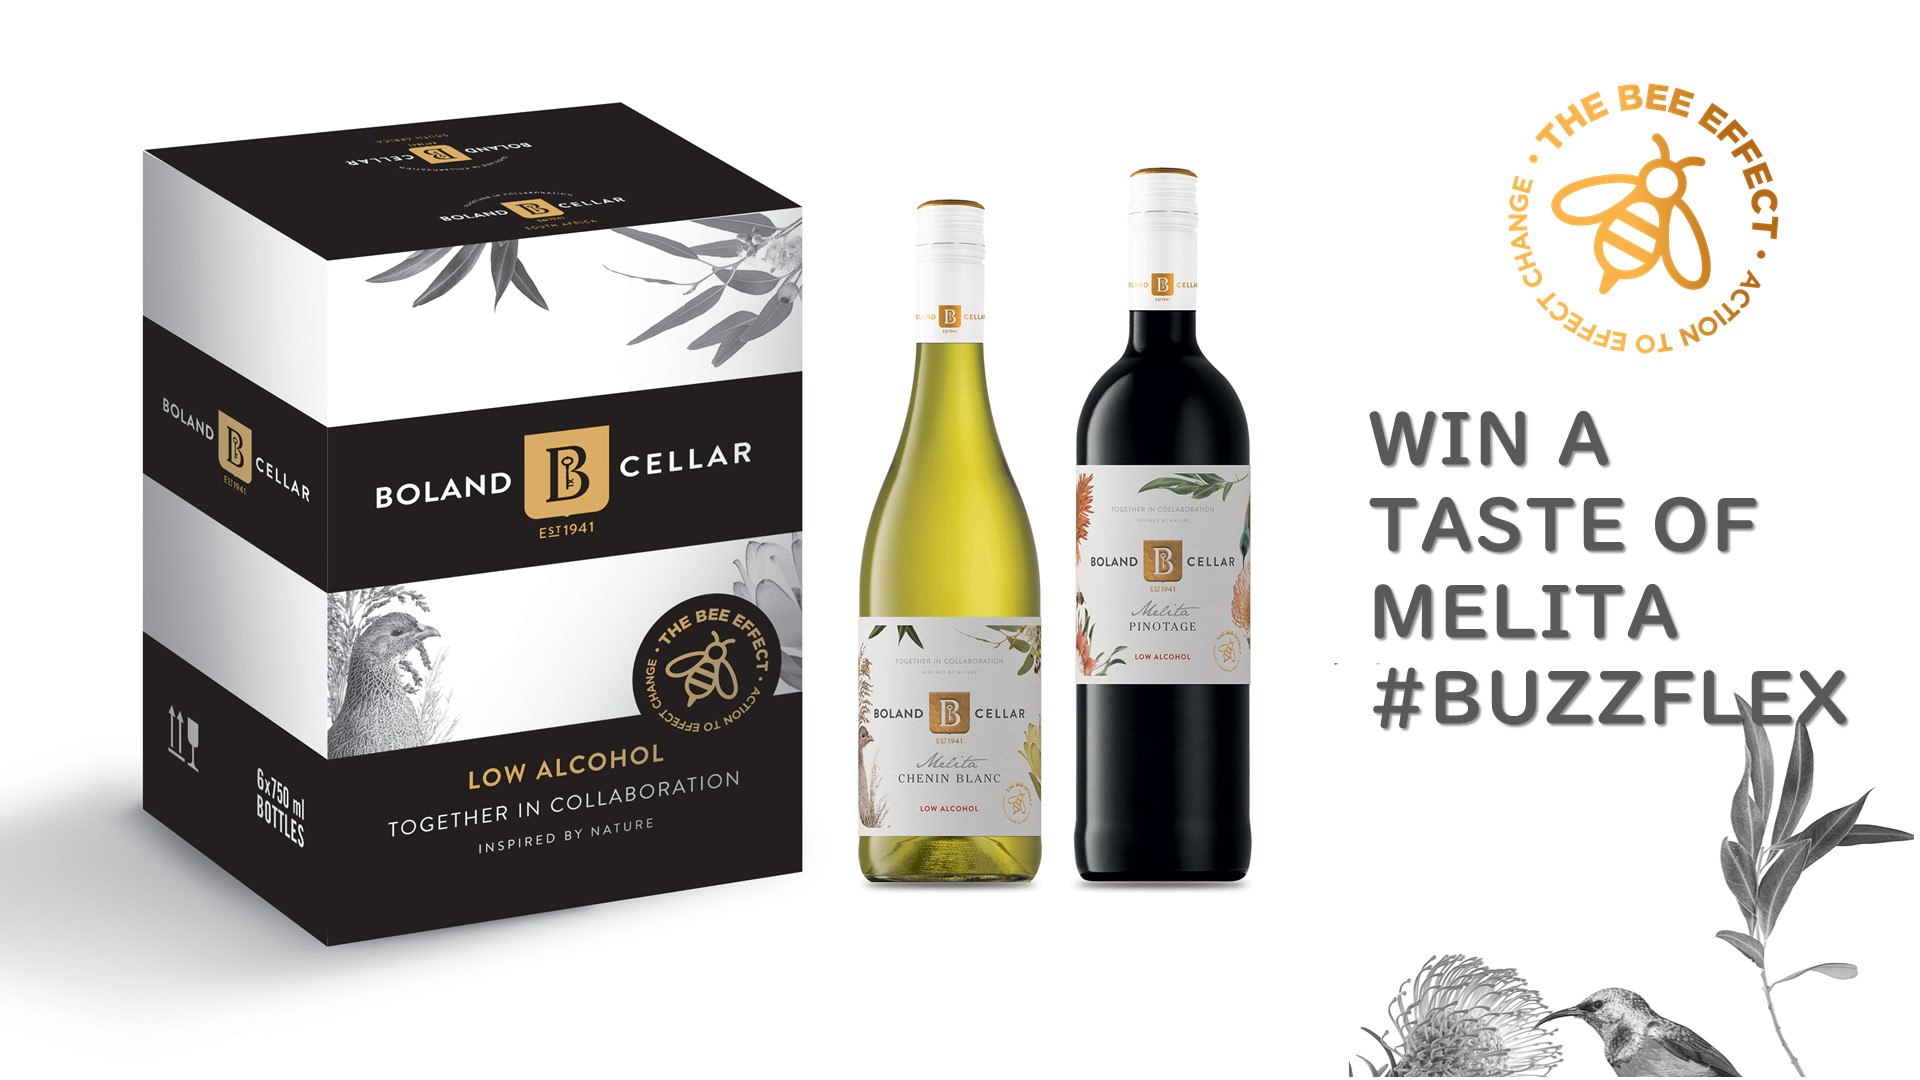 Over 18? Stand a chance to win a case of Melita Chenin Blanc and a case of Melita Pinotage - the buzz in low-alcohol wines from Boland Cellar.